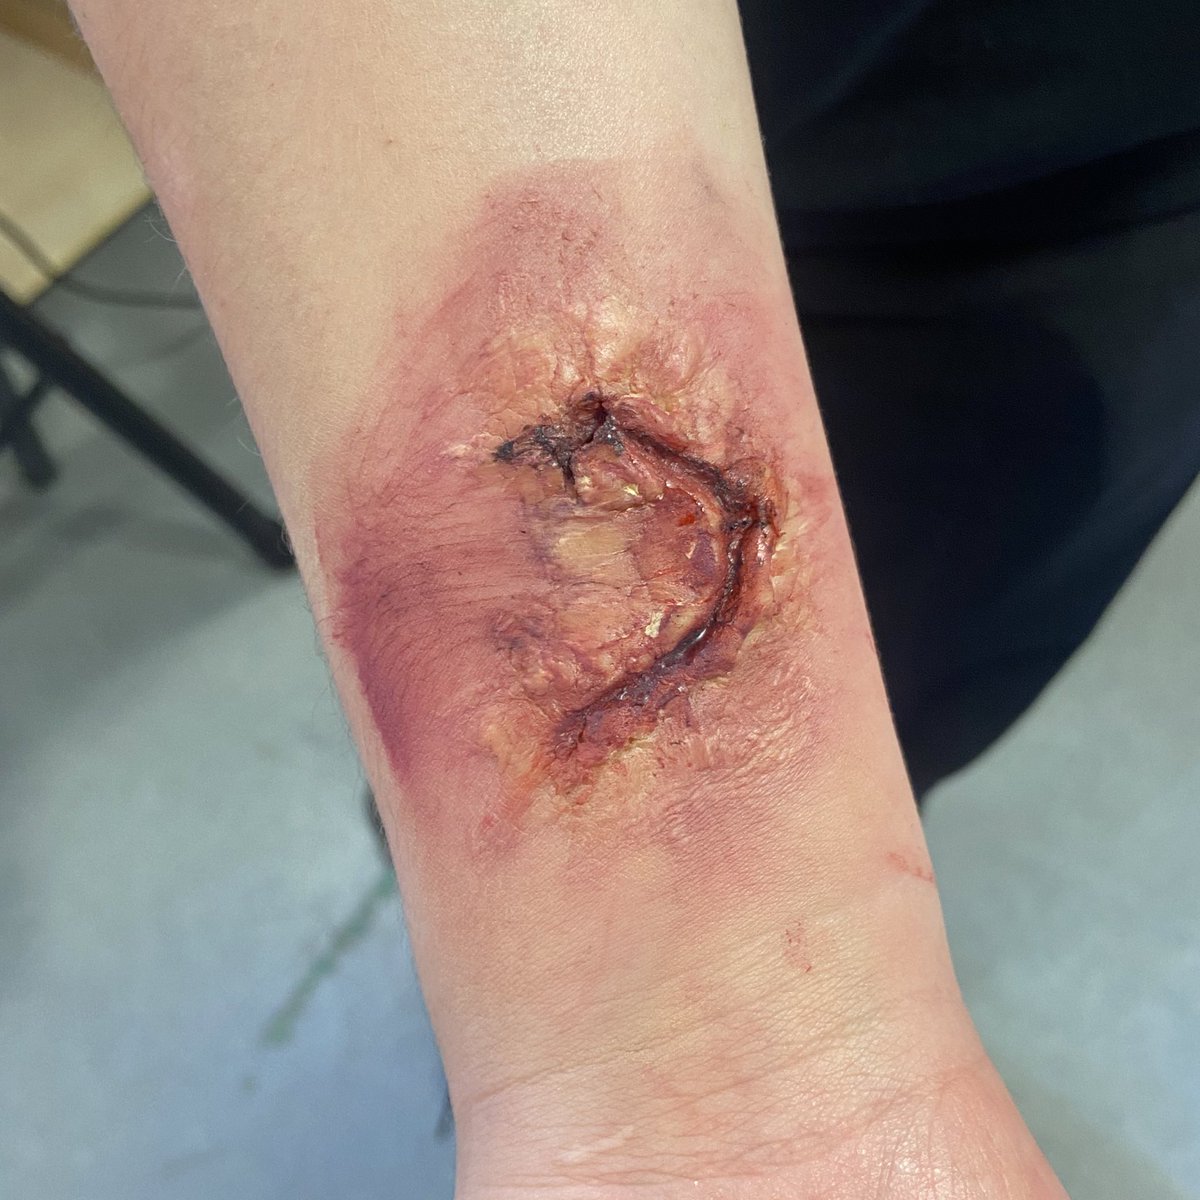 S3 moved on from last weeks bruises to create wounds this week! Fab work and focus! 🎭🙌🏼 #sfxmakeup #dramateacher #pedagoo